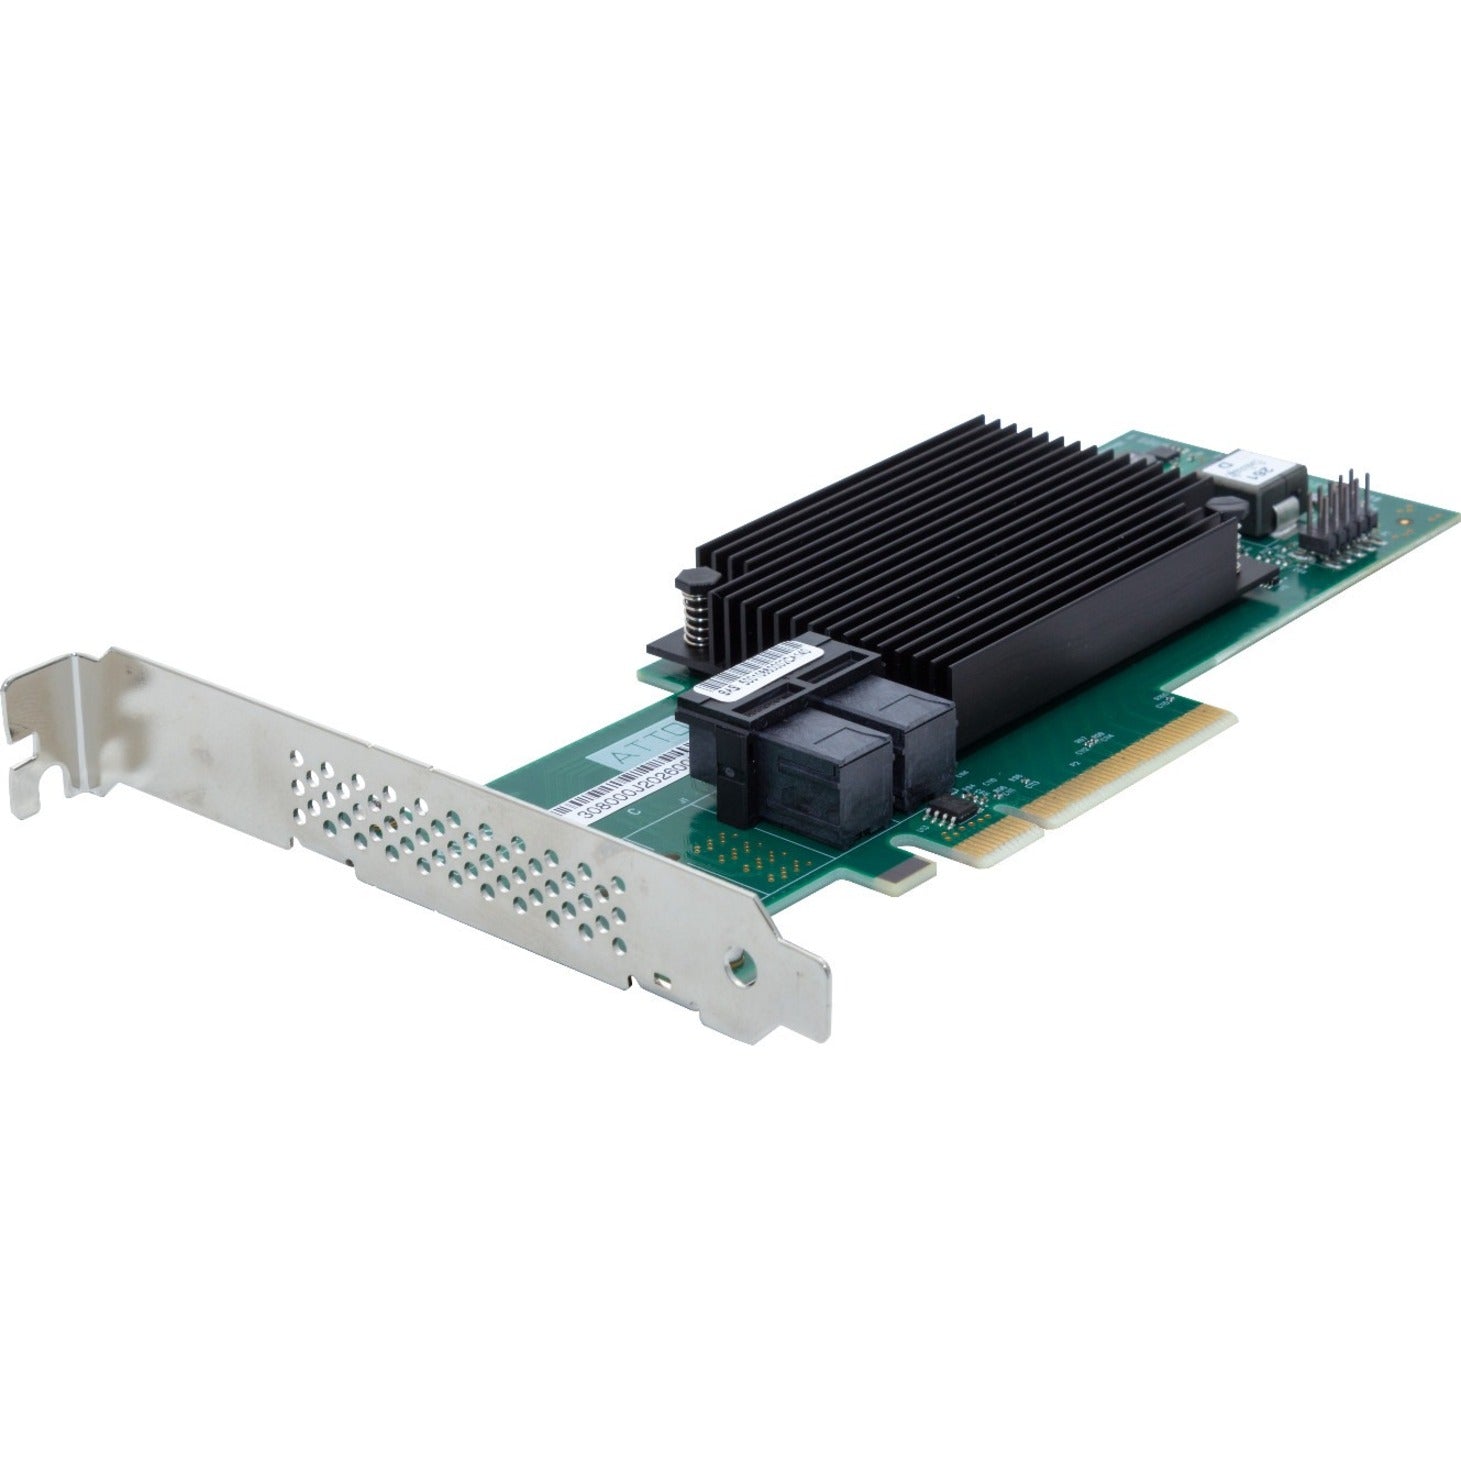 ATTO ESAH-1208-GT0 ExpressSAS 8 Internal Port 12Gb/s SAS/SATA to PCIe 4.0 Host Bus Adapter, High-Speed Data Transfer and RAID Support